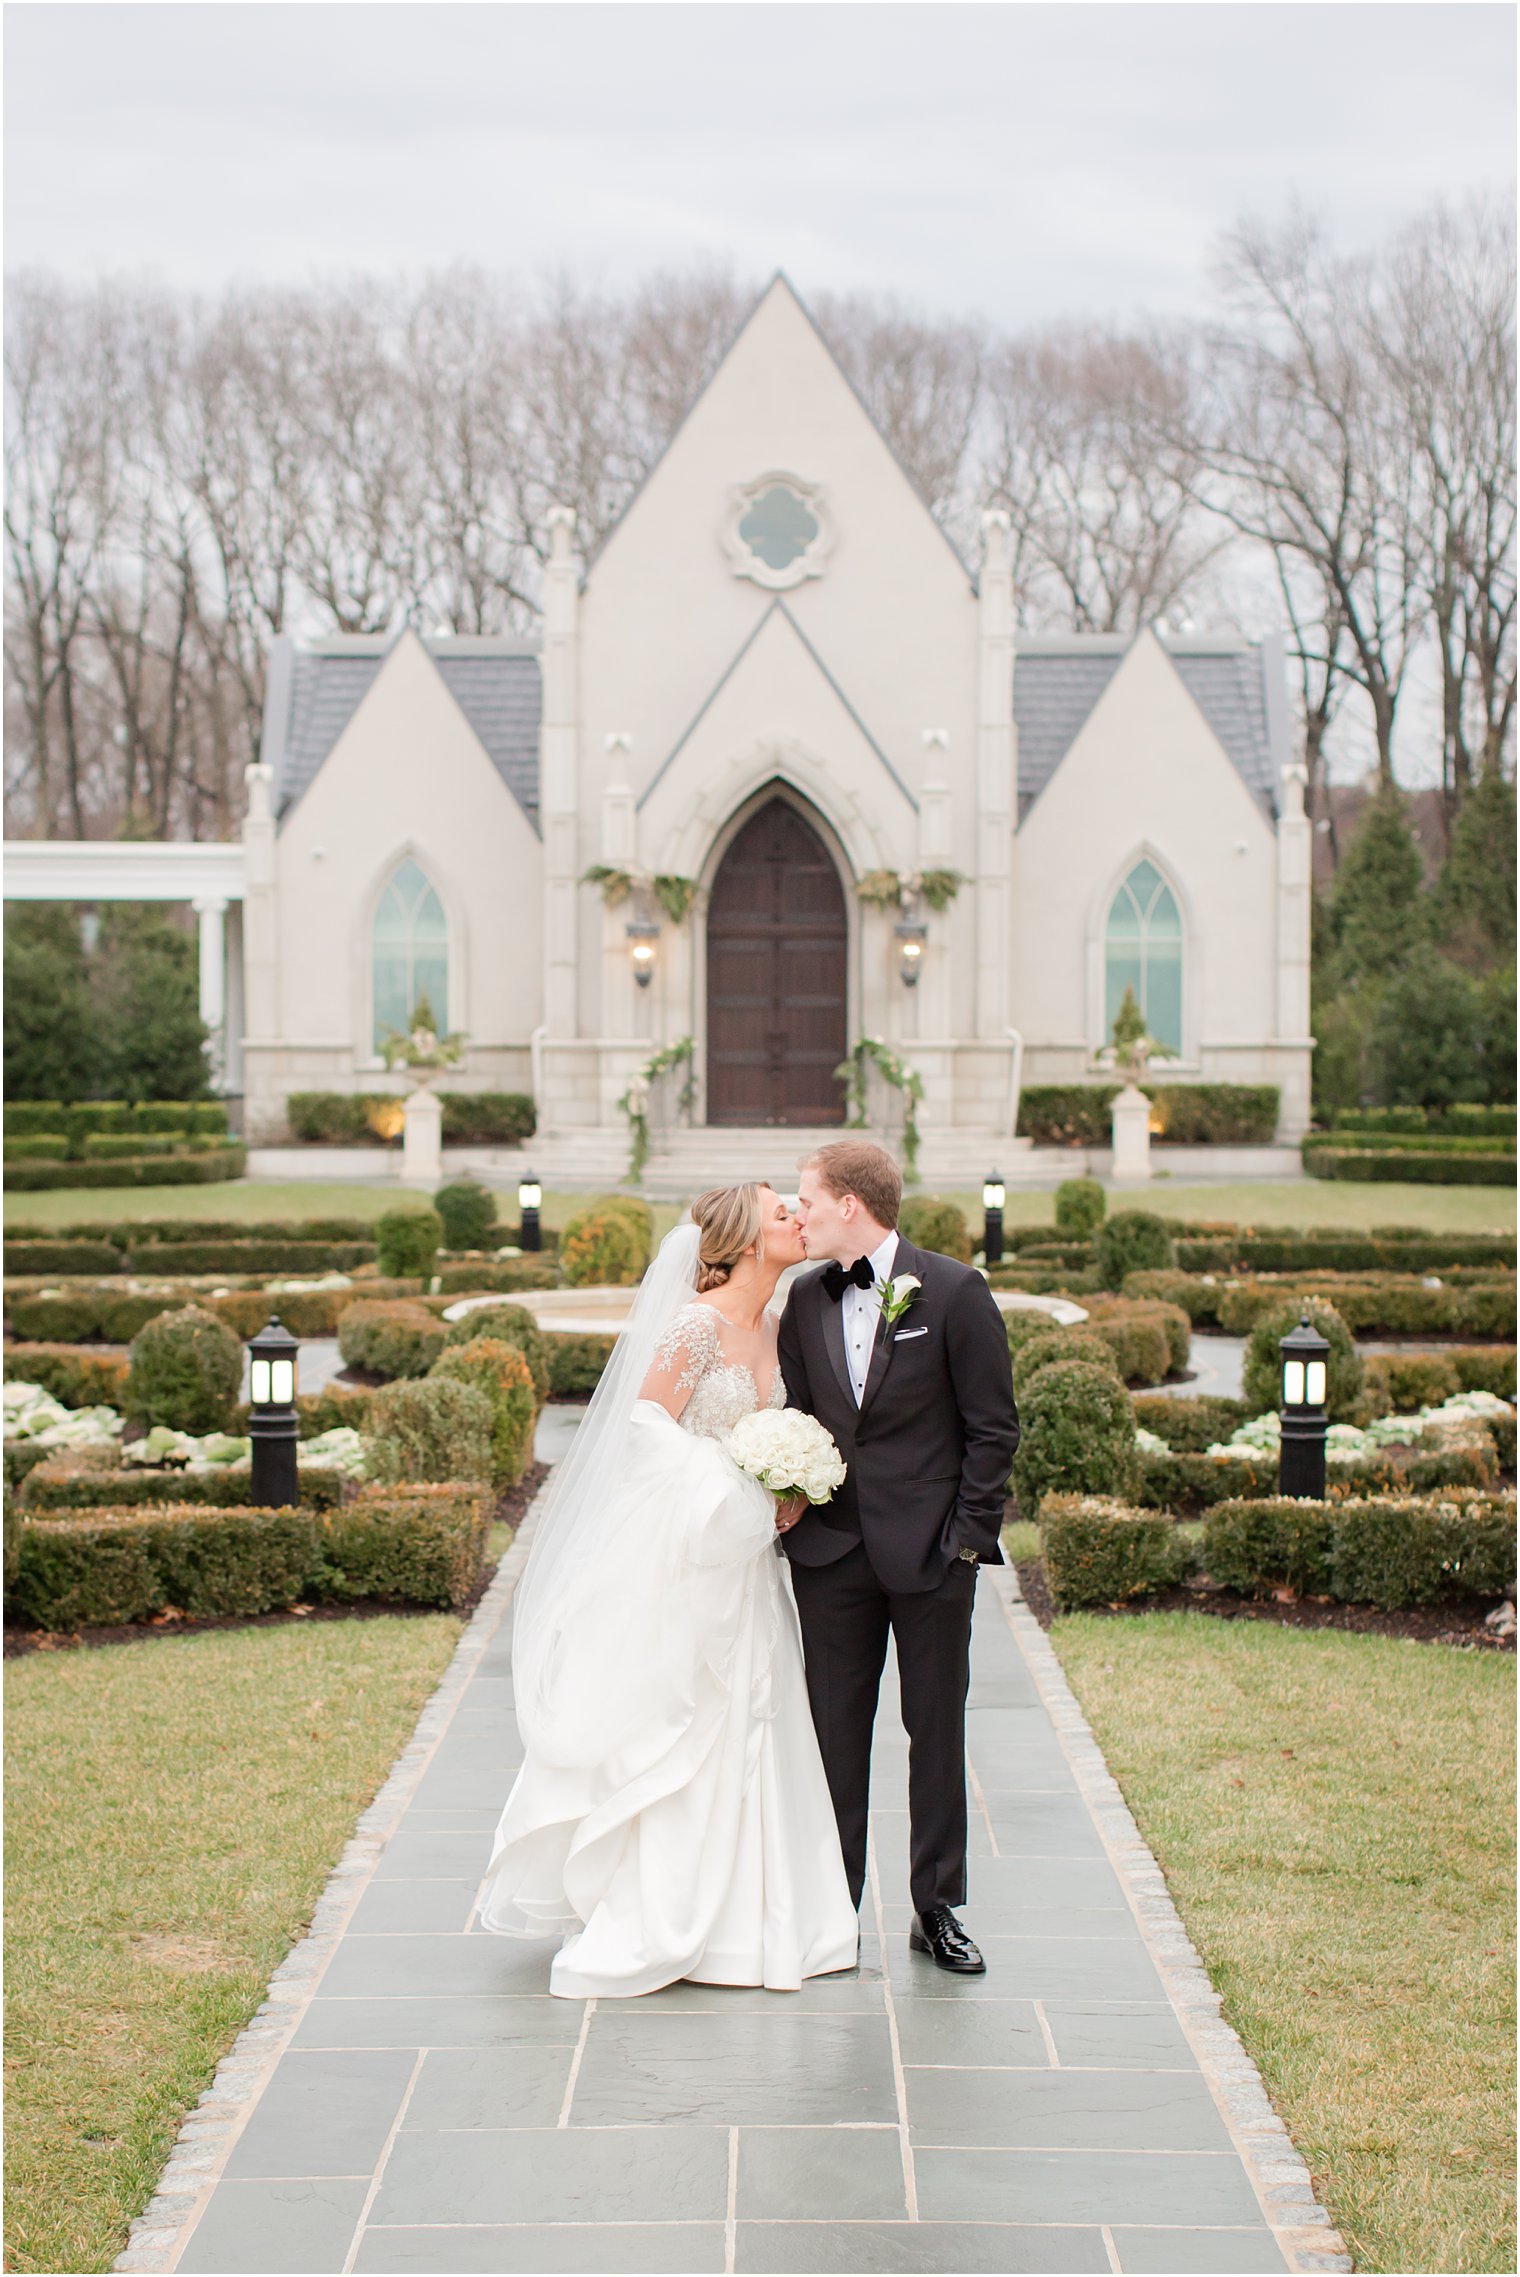 Bride and groom at Winter wedding at Park Chateau Estate and Gardens